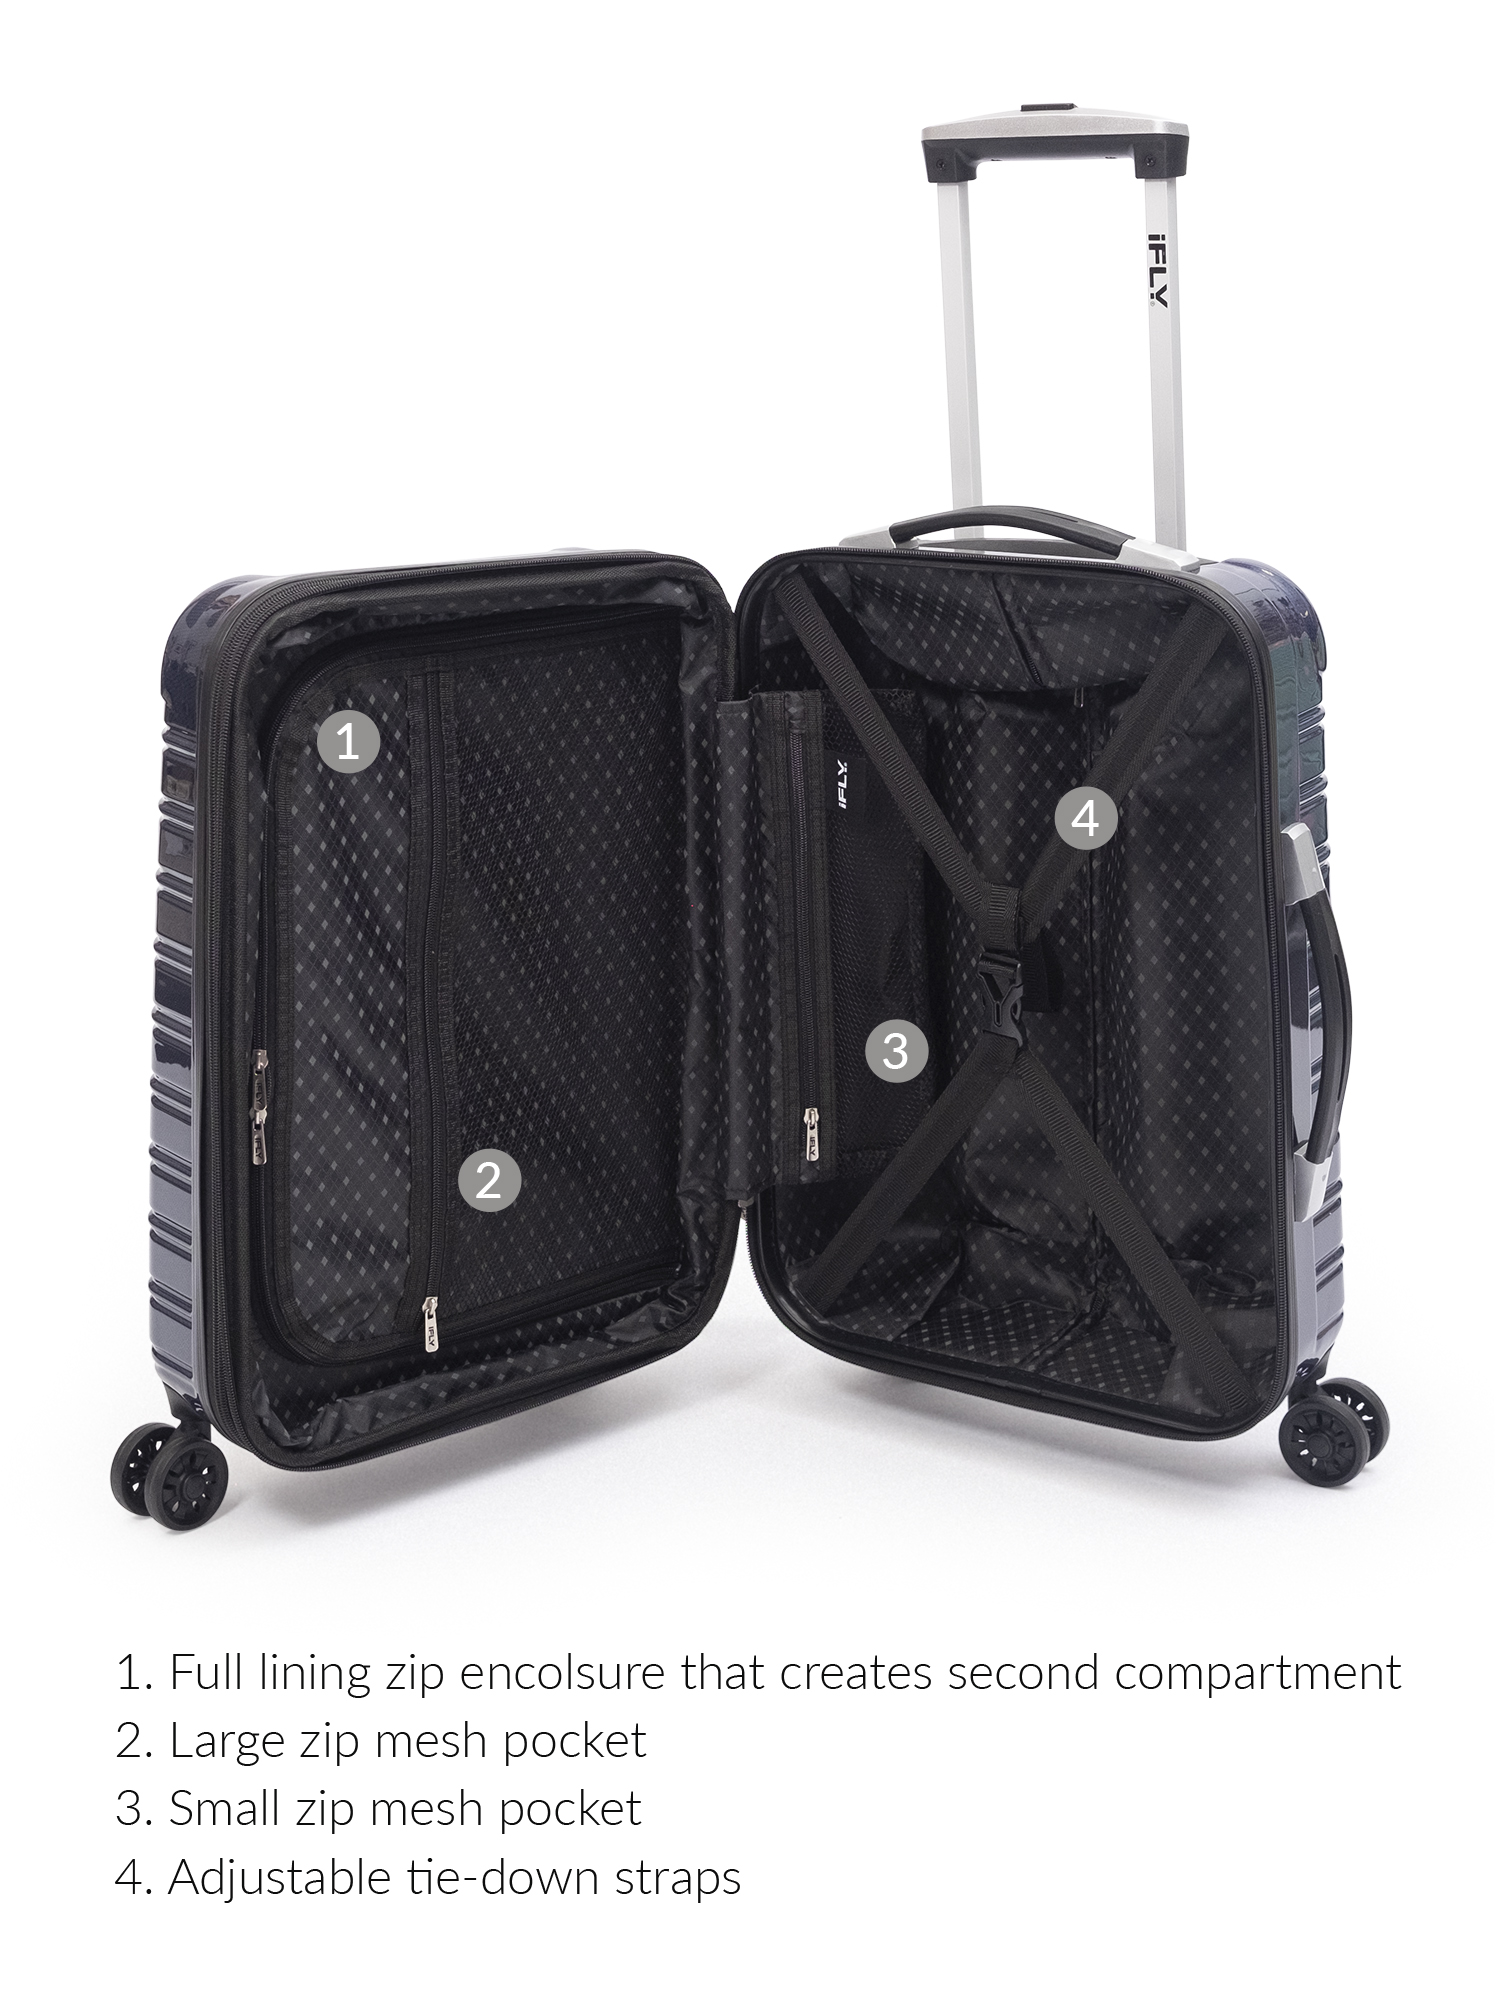 iFLY Online Exclusive Hard Sided Luggage Fibertech 20" & Travel Case - image 4 of 9